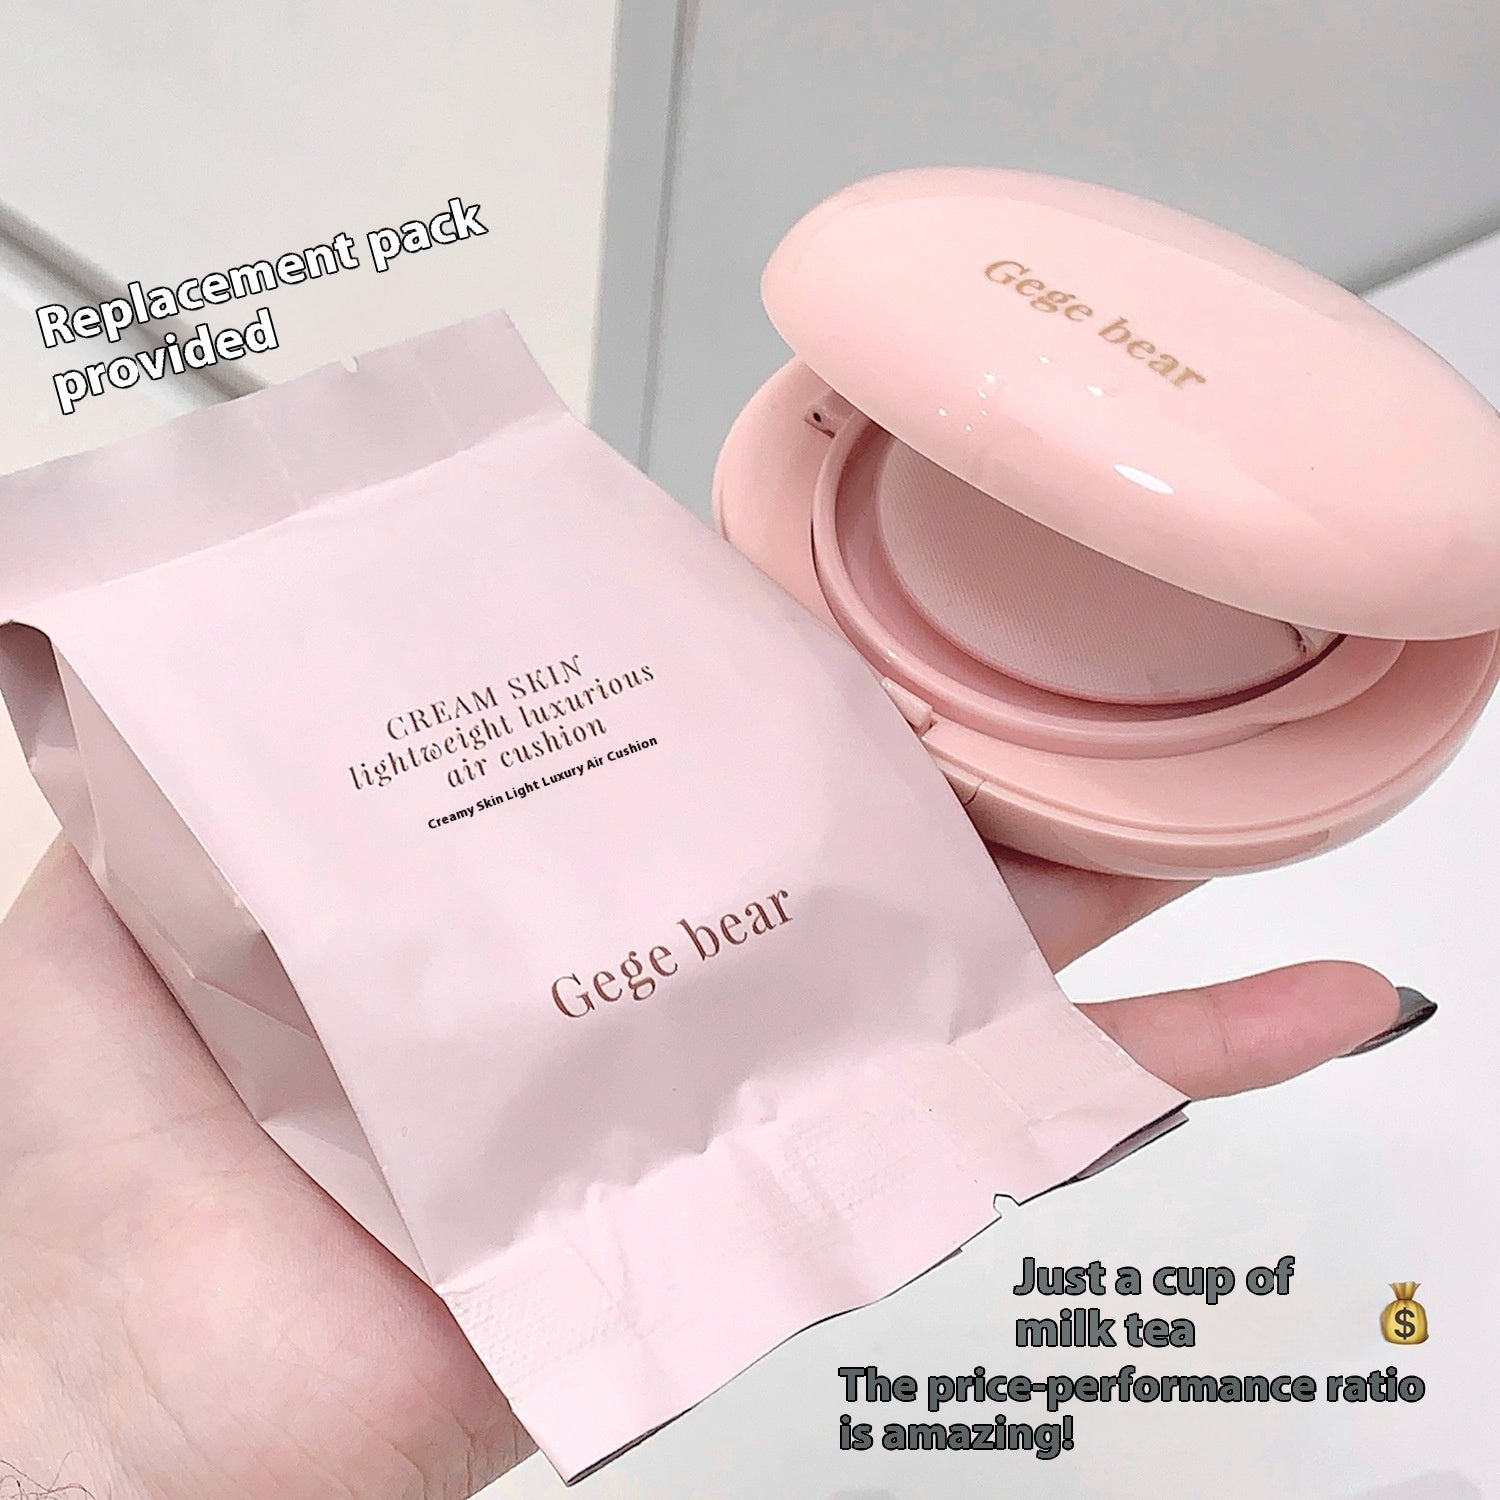 Cream Skin Light Luxury Face Cushion BB Cream Concealer Nude Color Makeup Girlish Style